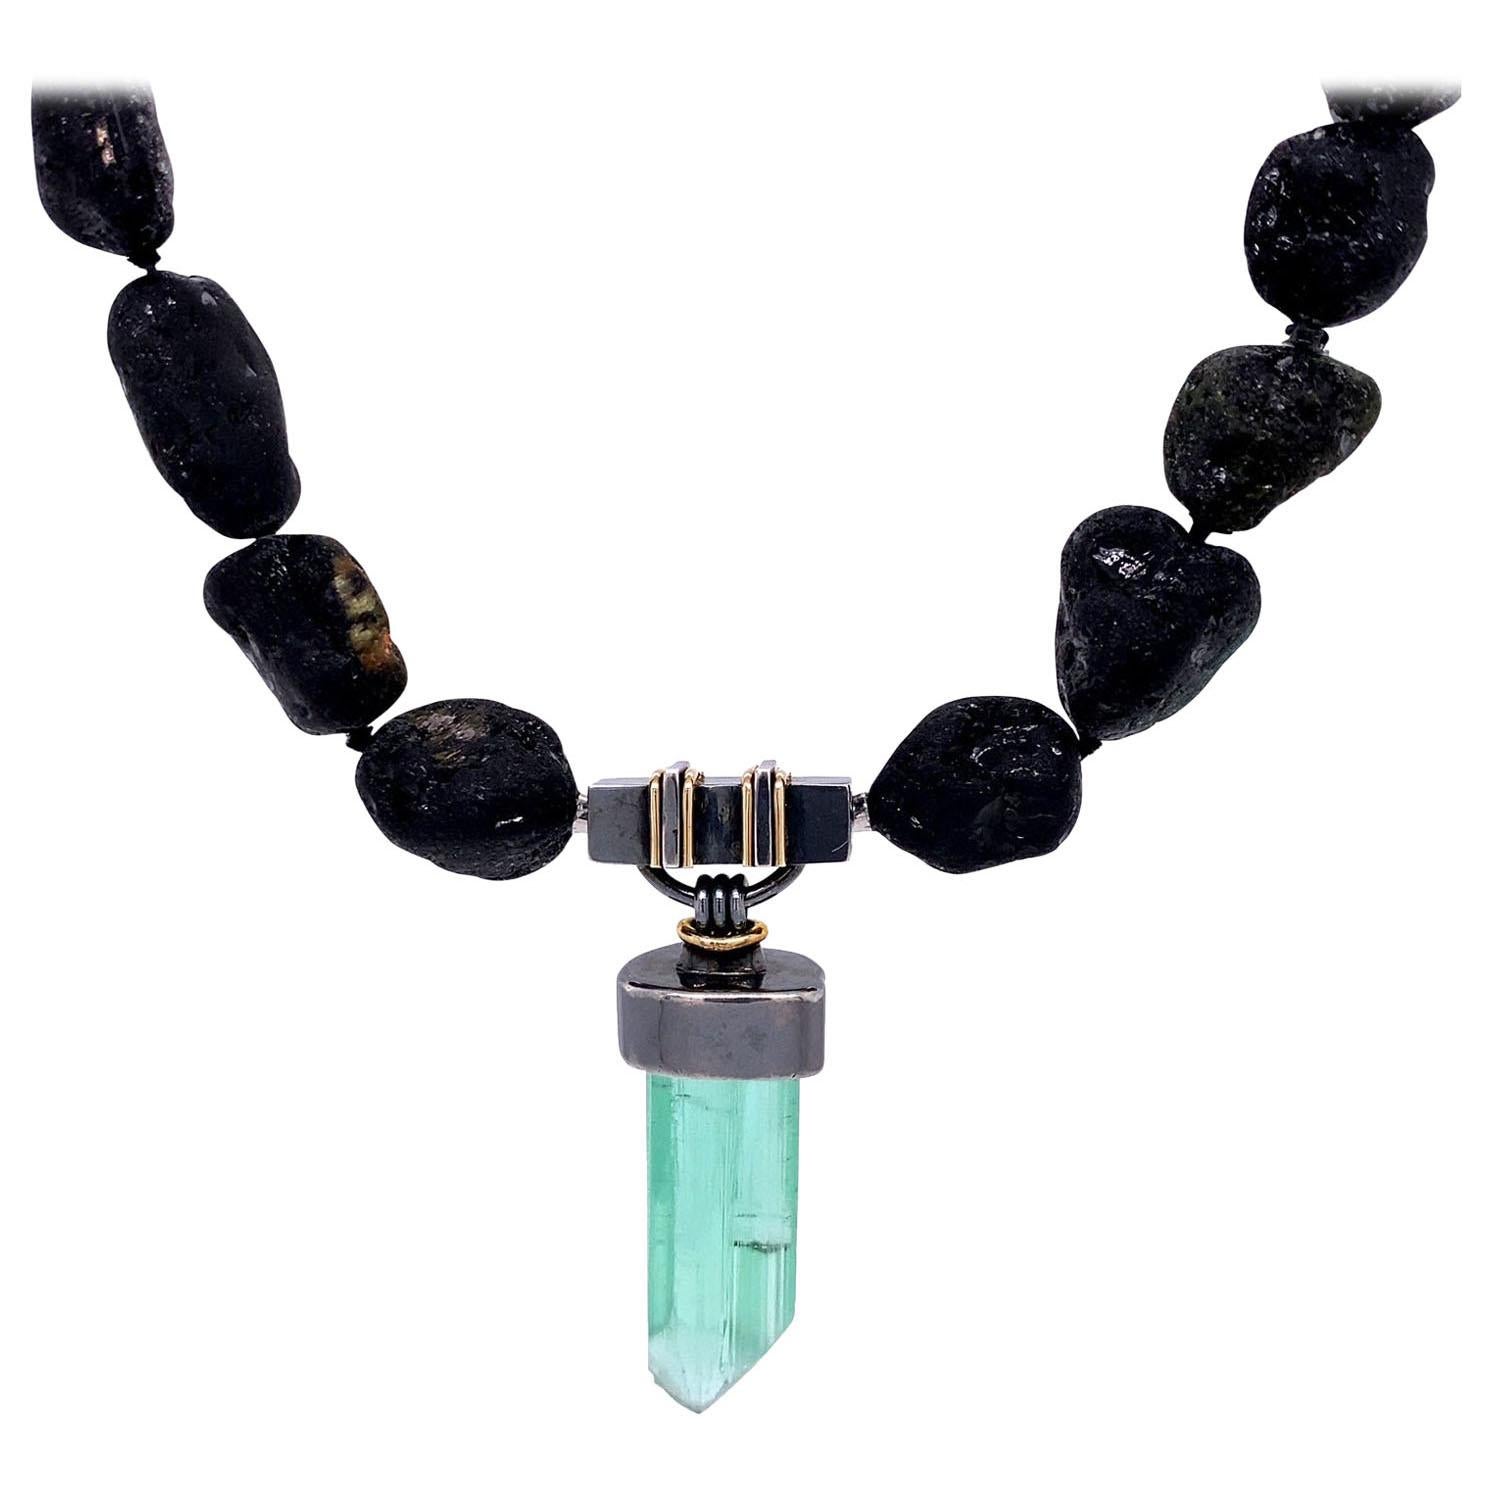 Black Tourmaline Necklace with a Silver and 18k Green Tourmaline Crystal Clasp